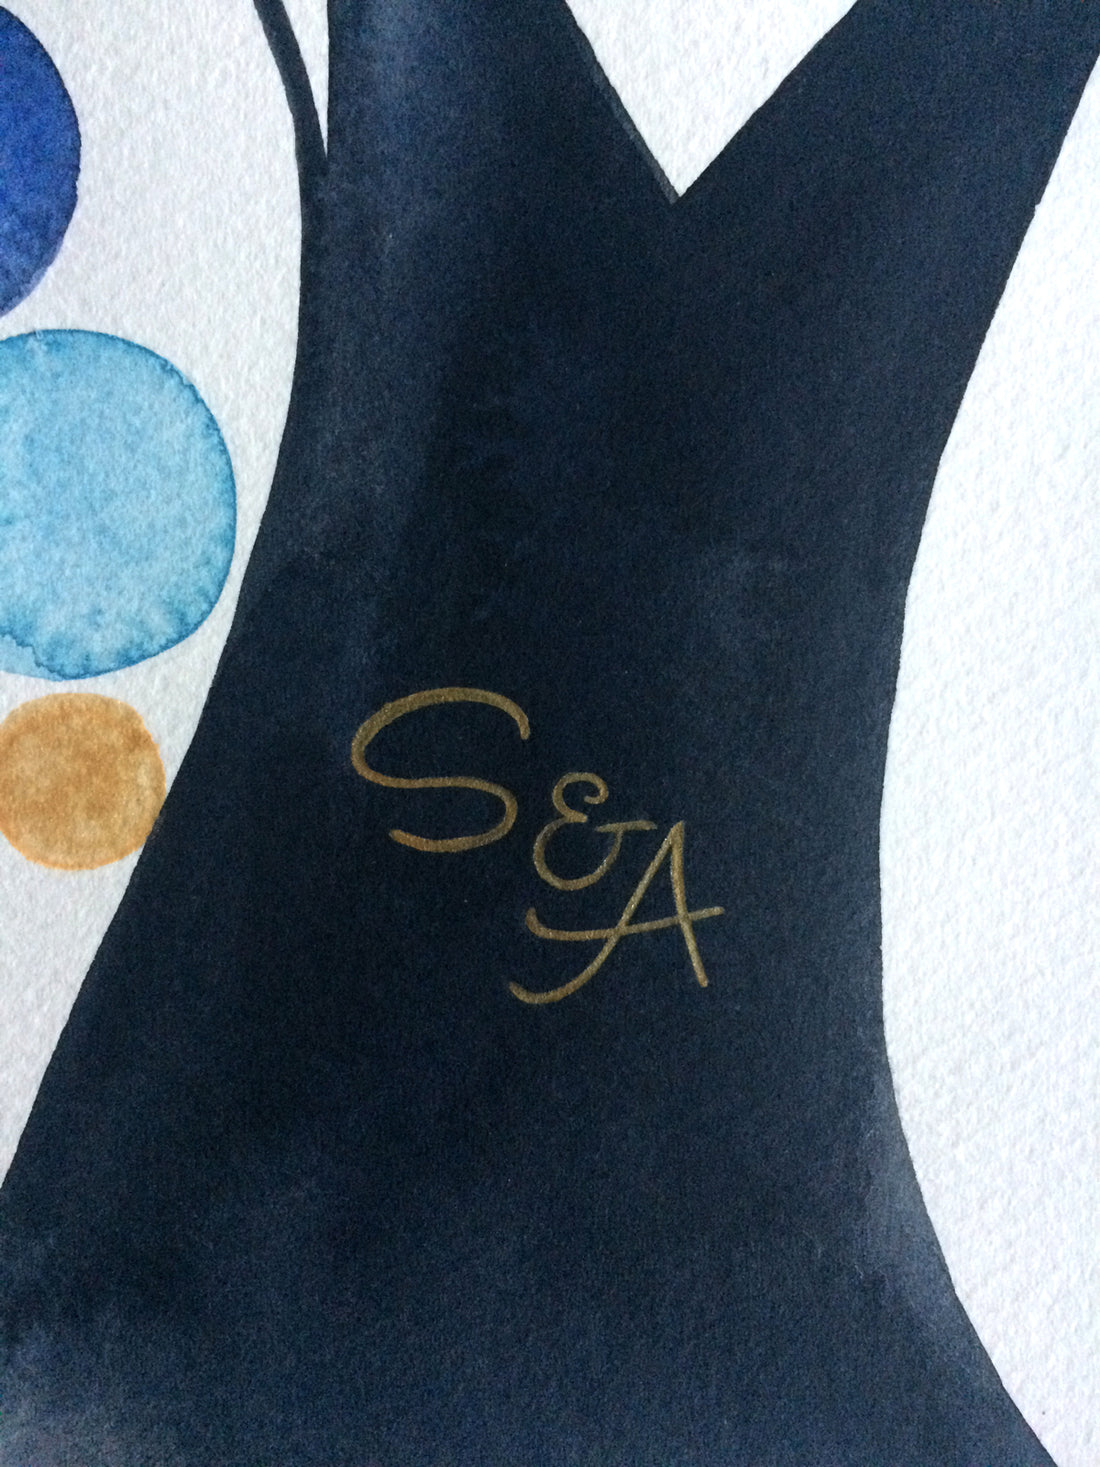 S & A wedding monogram in gold painting